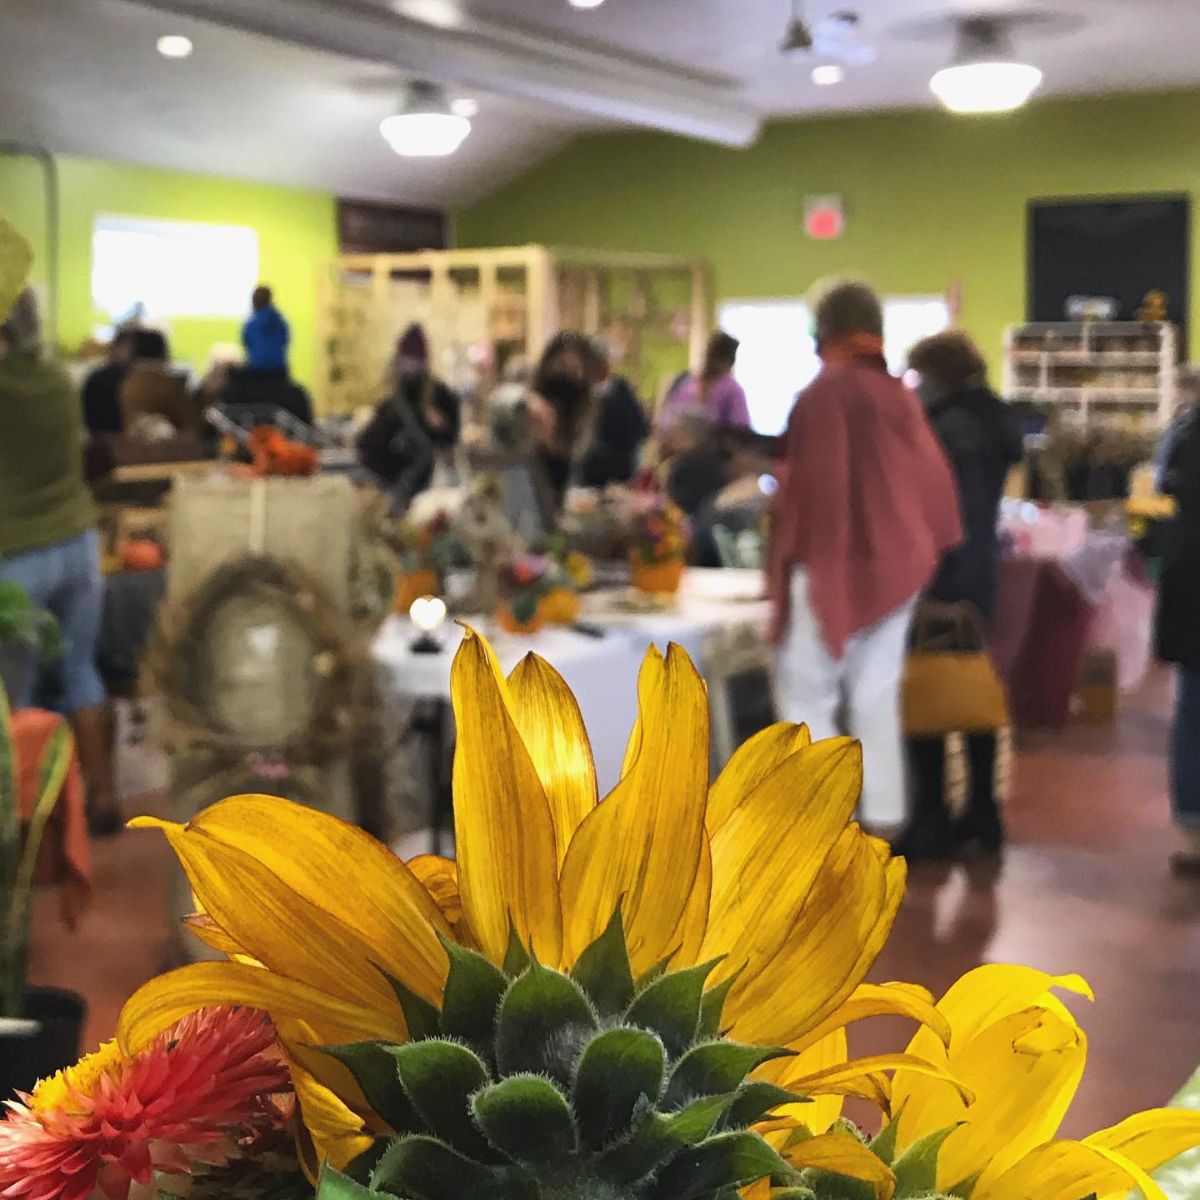 A bright green room with vendors' tables and flowers in the foreground